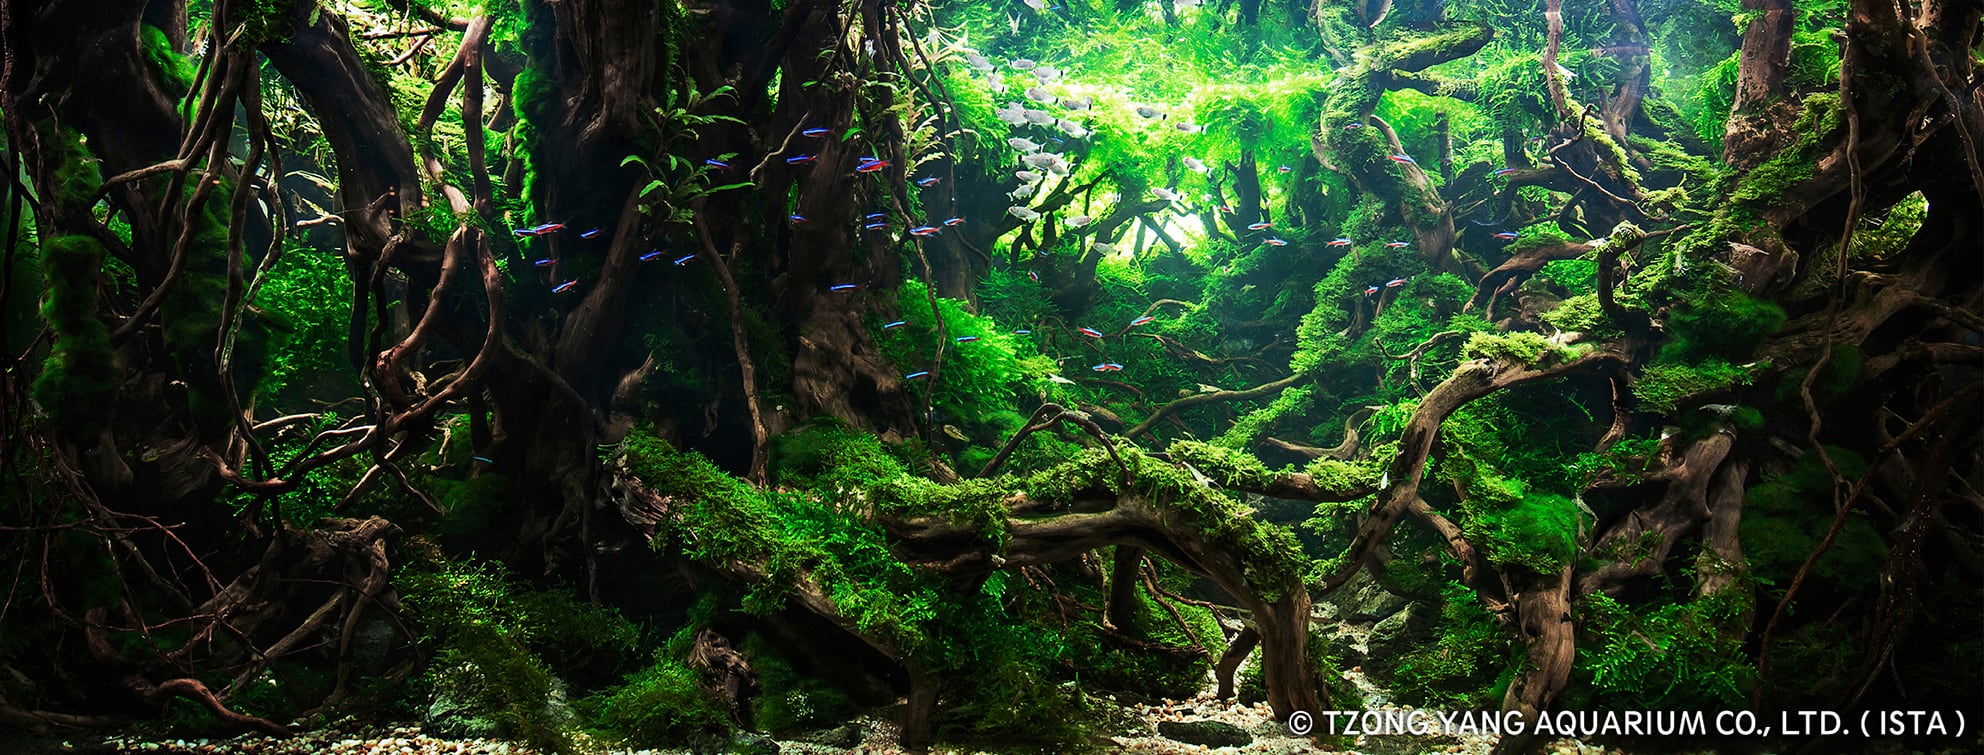 A Guide to Keeping and Growing Aquatic Moss - Aquascaping Love